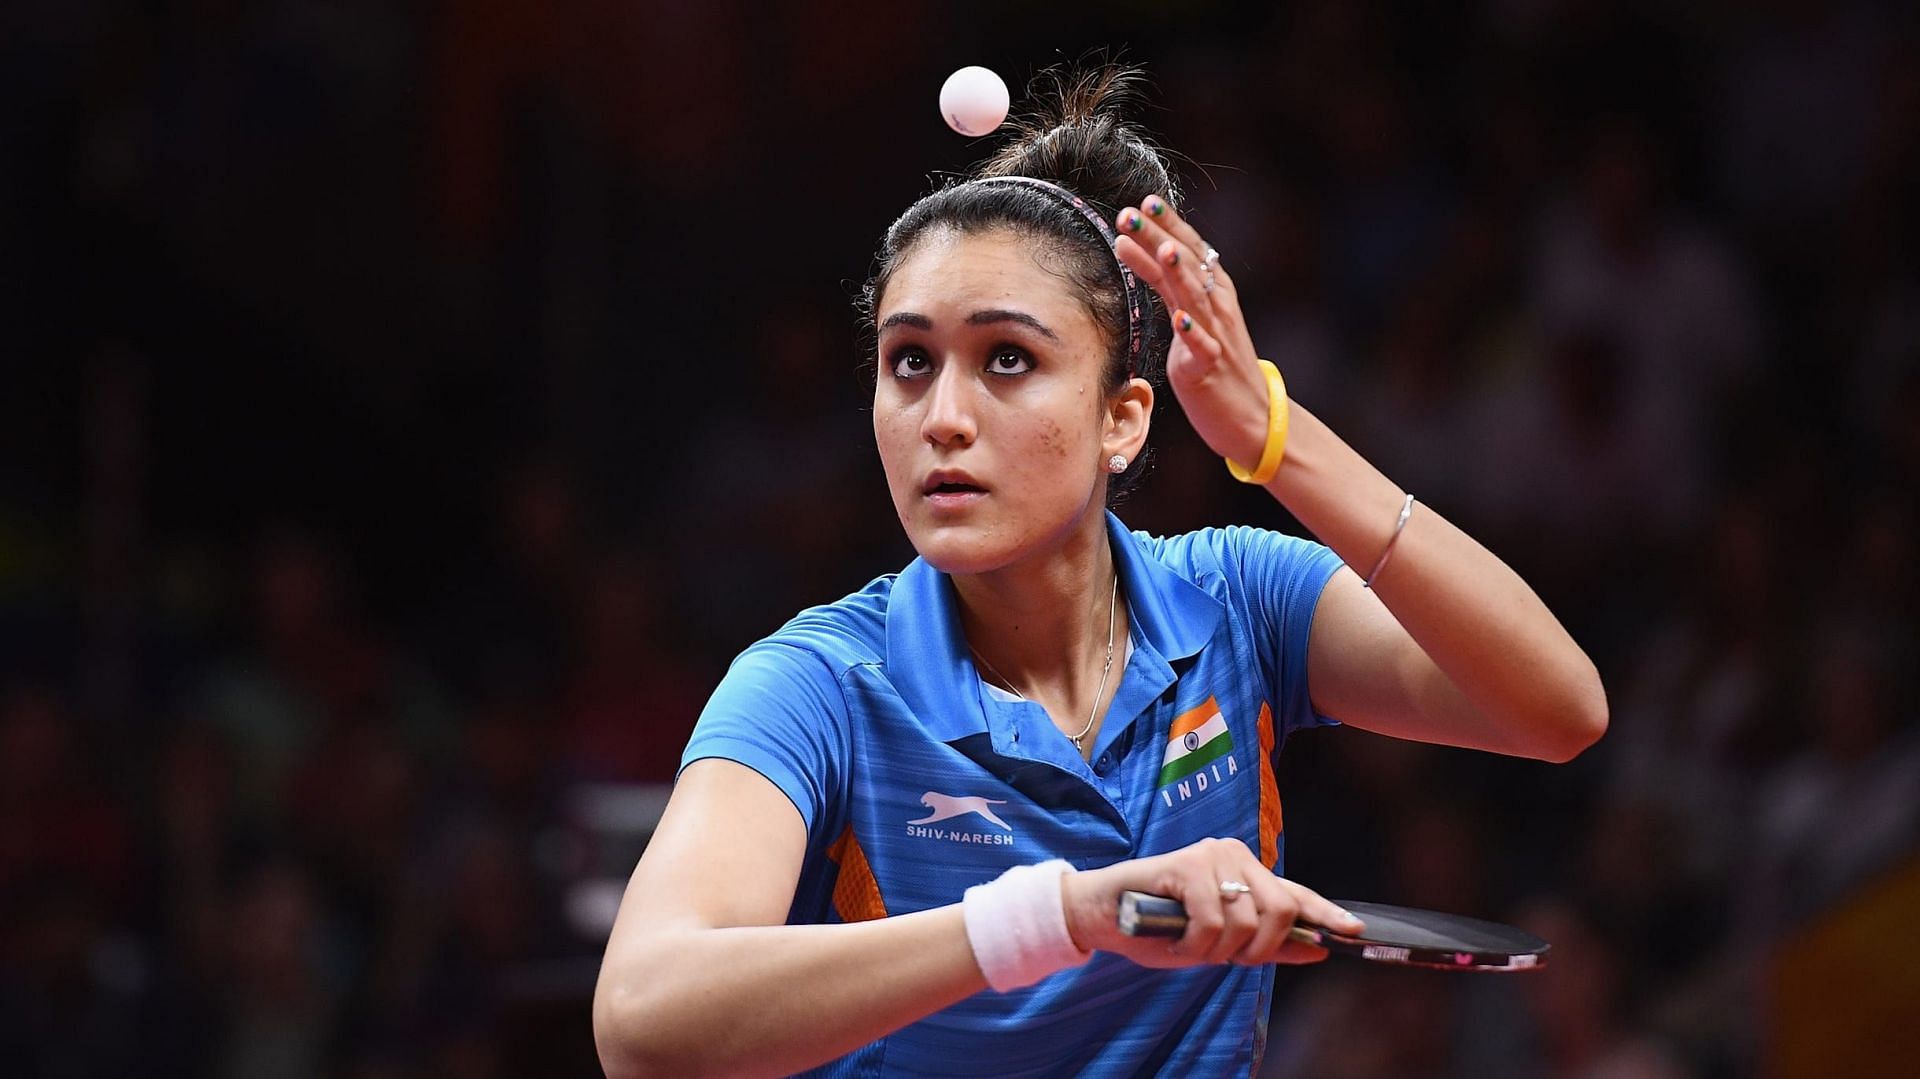 India will hope to better its medal tally in table tennis at the Asian Games